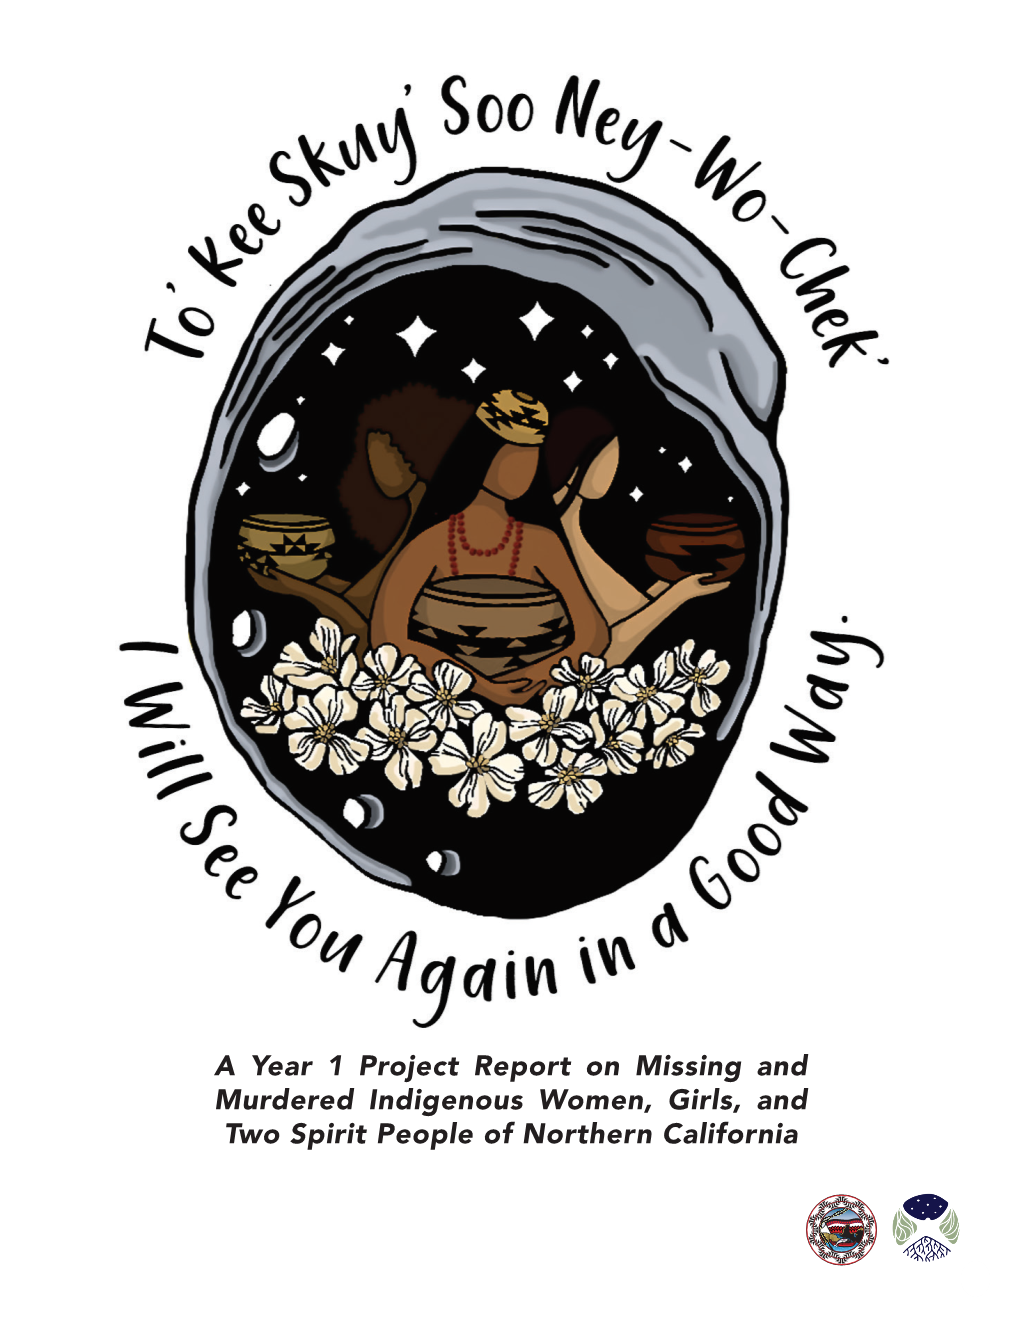 A Year 1 Project Report on Missing and Murdered Indigenous Women, Girls, and Two Spirit People of Northern California